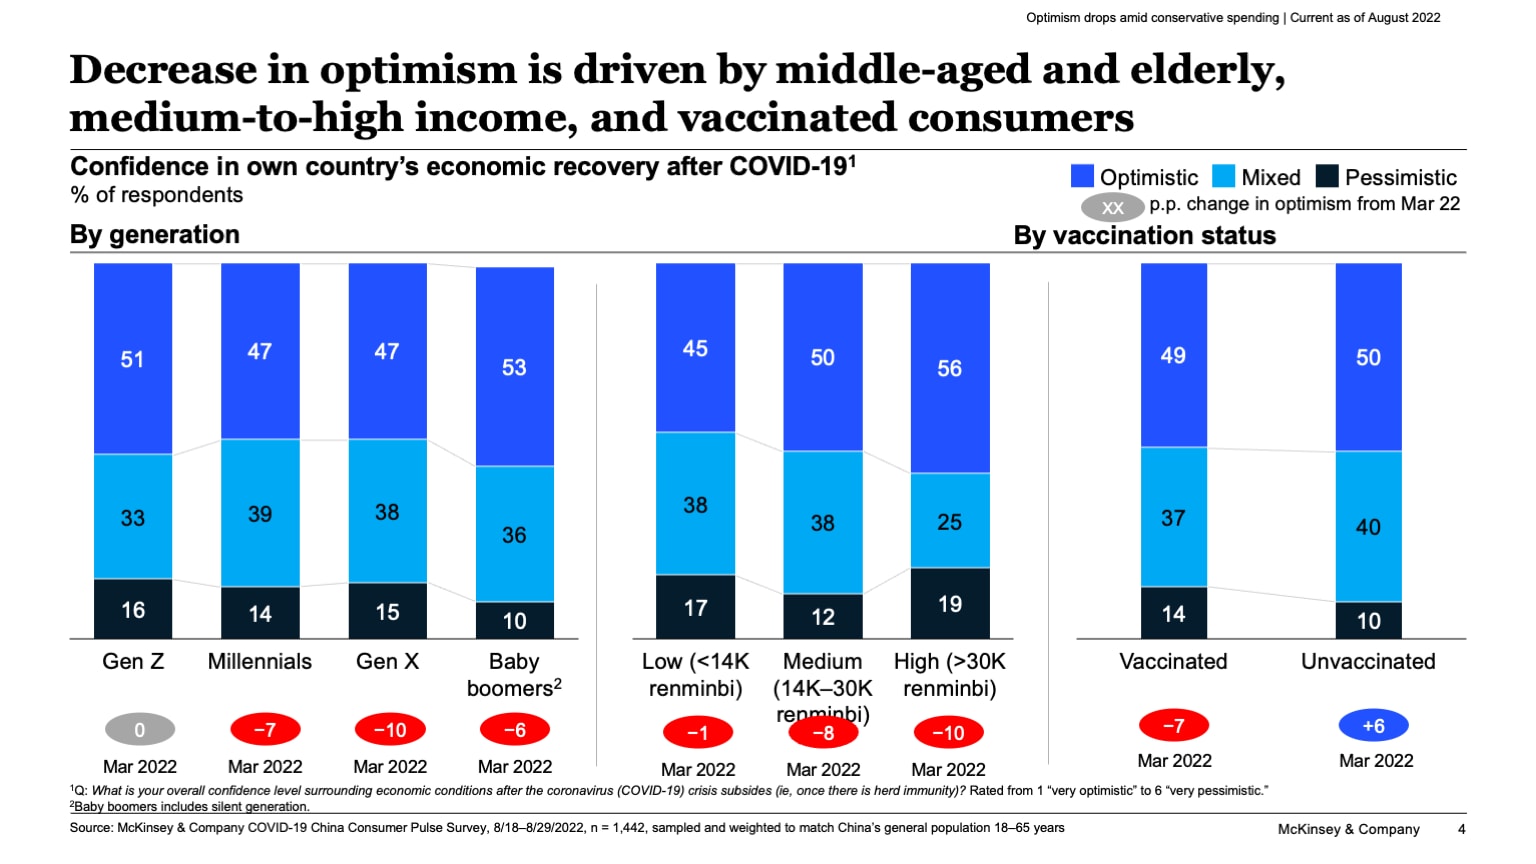 Decrease in optimism is driven by middle-aged and elderly, medium-to-high income, and vaccinated consumers